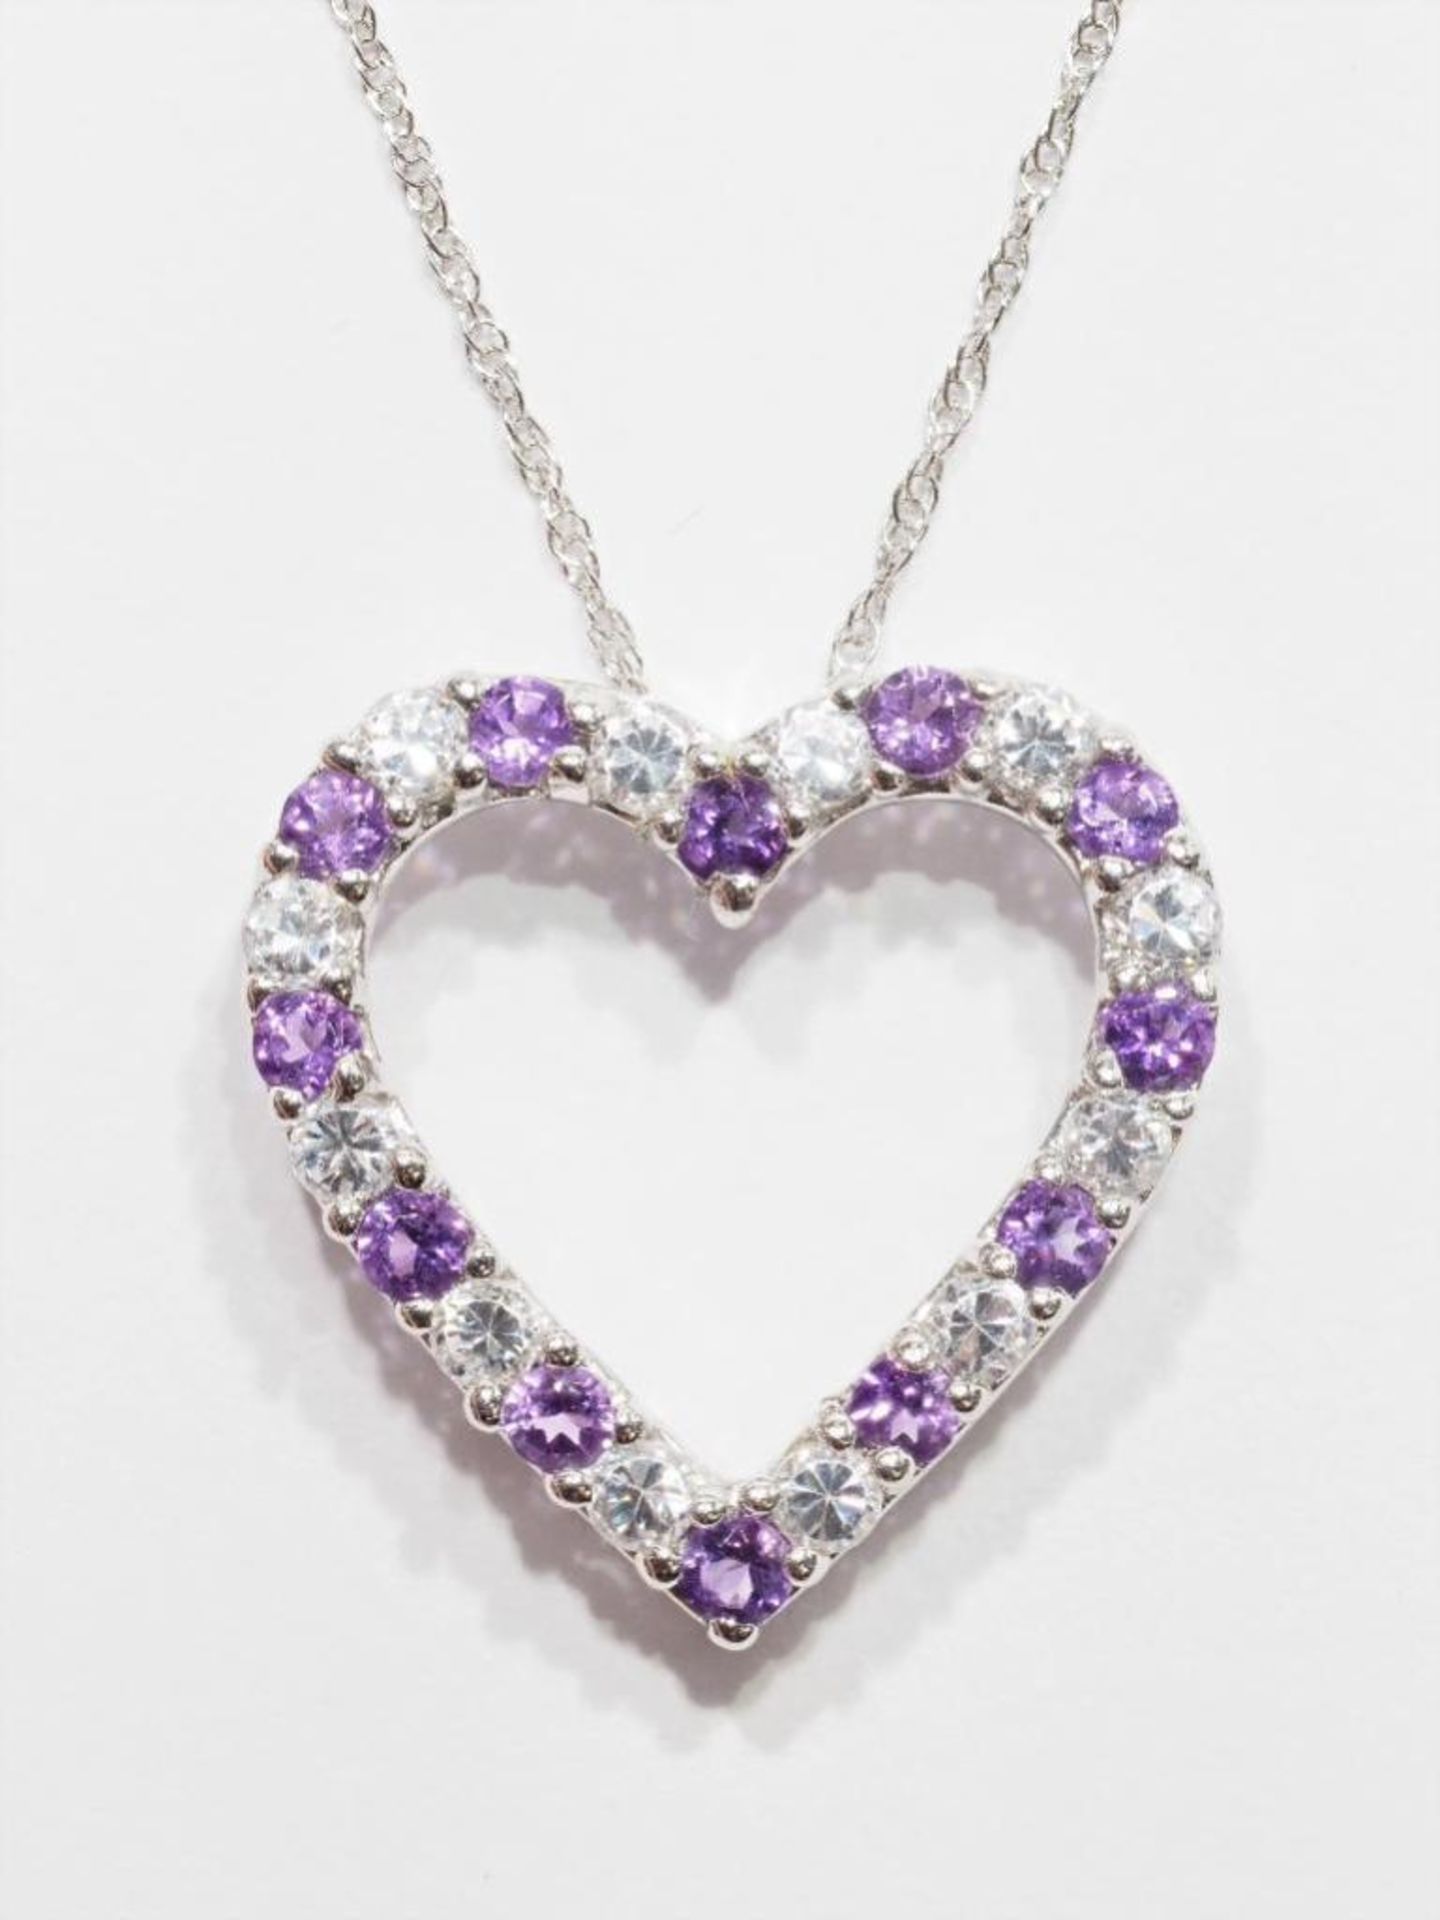 Sterling Silver Natural Amethyst (February Birthstone) Heart Shaped Pendant Necklace with Chain. Ret